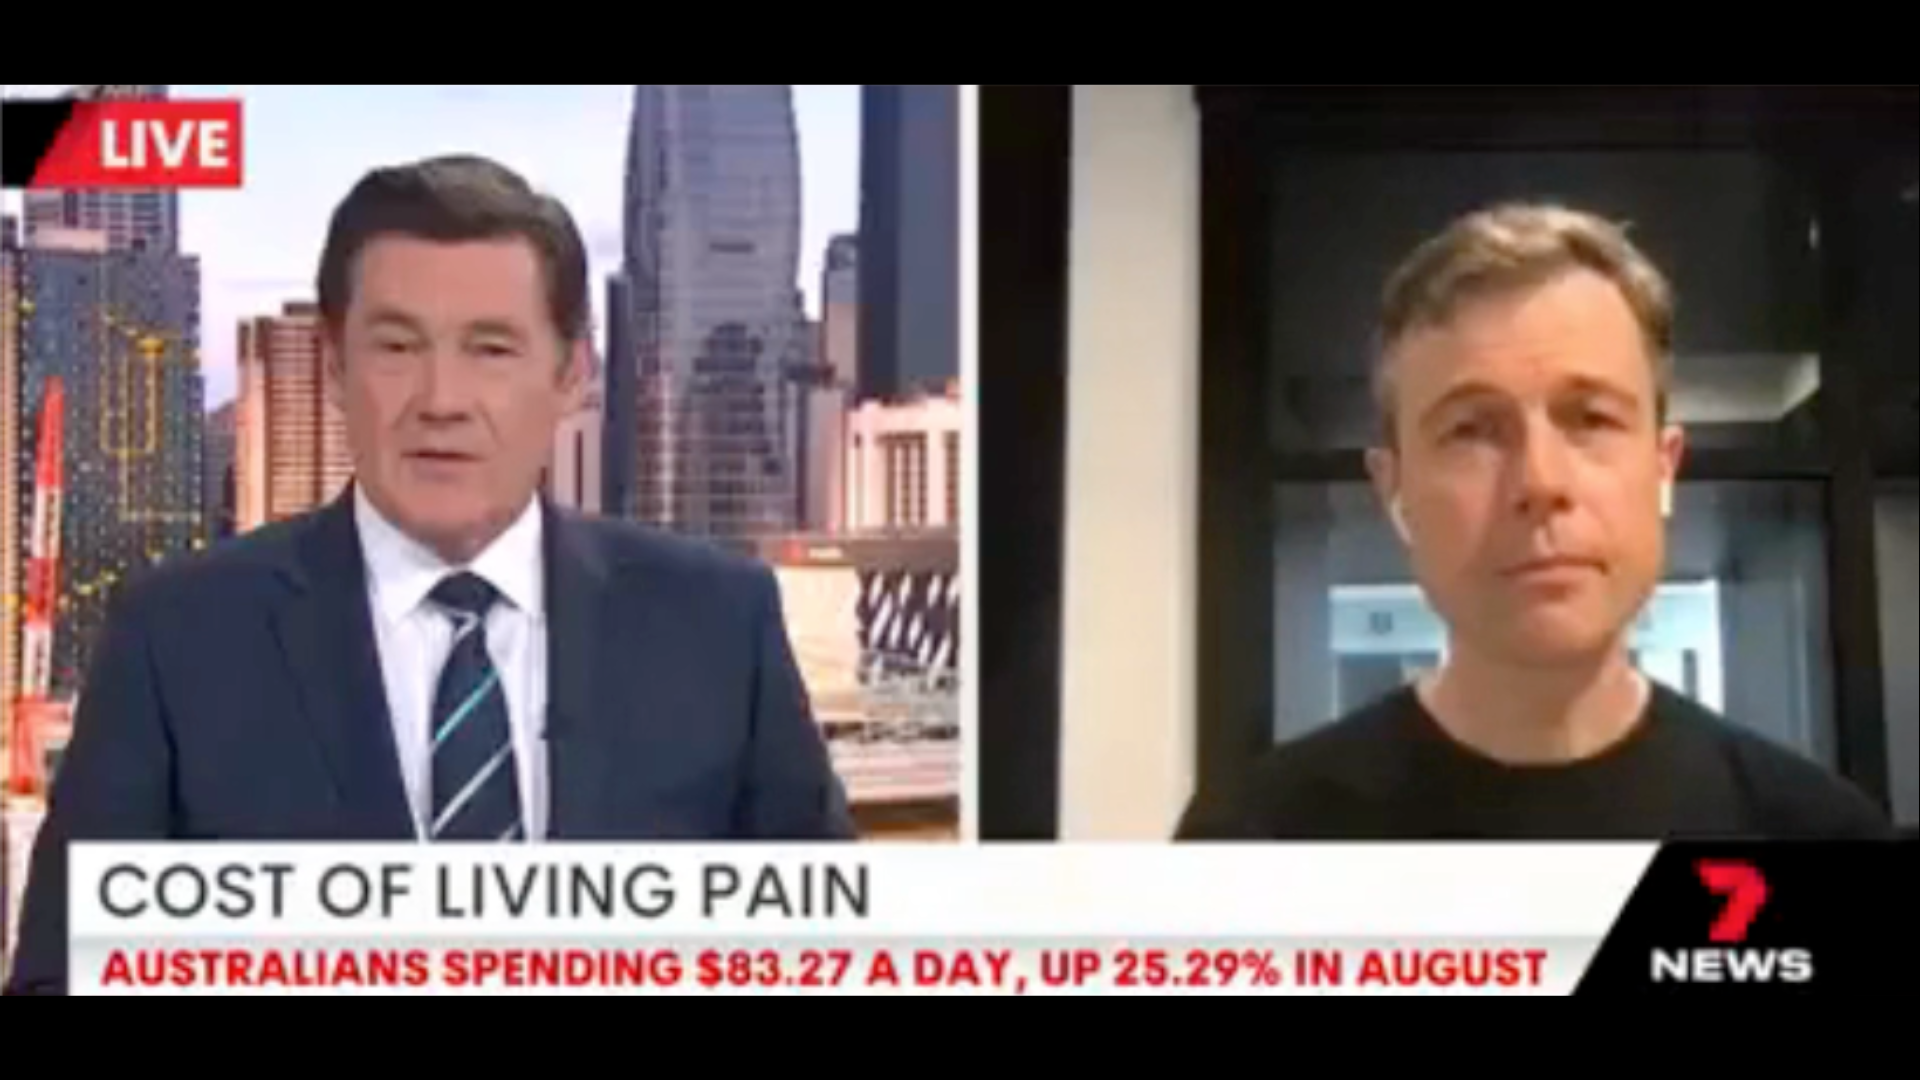 Beforepay CEO Jamie Twiss spoke with Mike Amor on 7NEWS about the impact of rising costs on our daily spending habits.